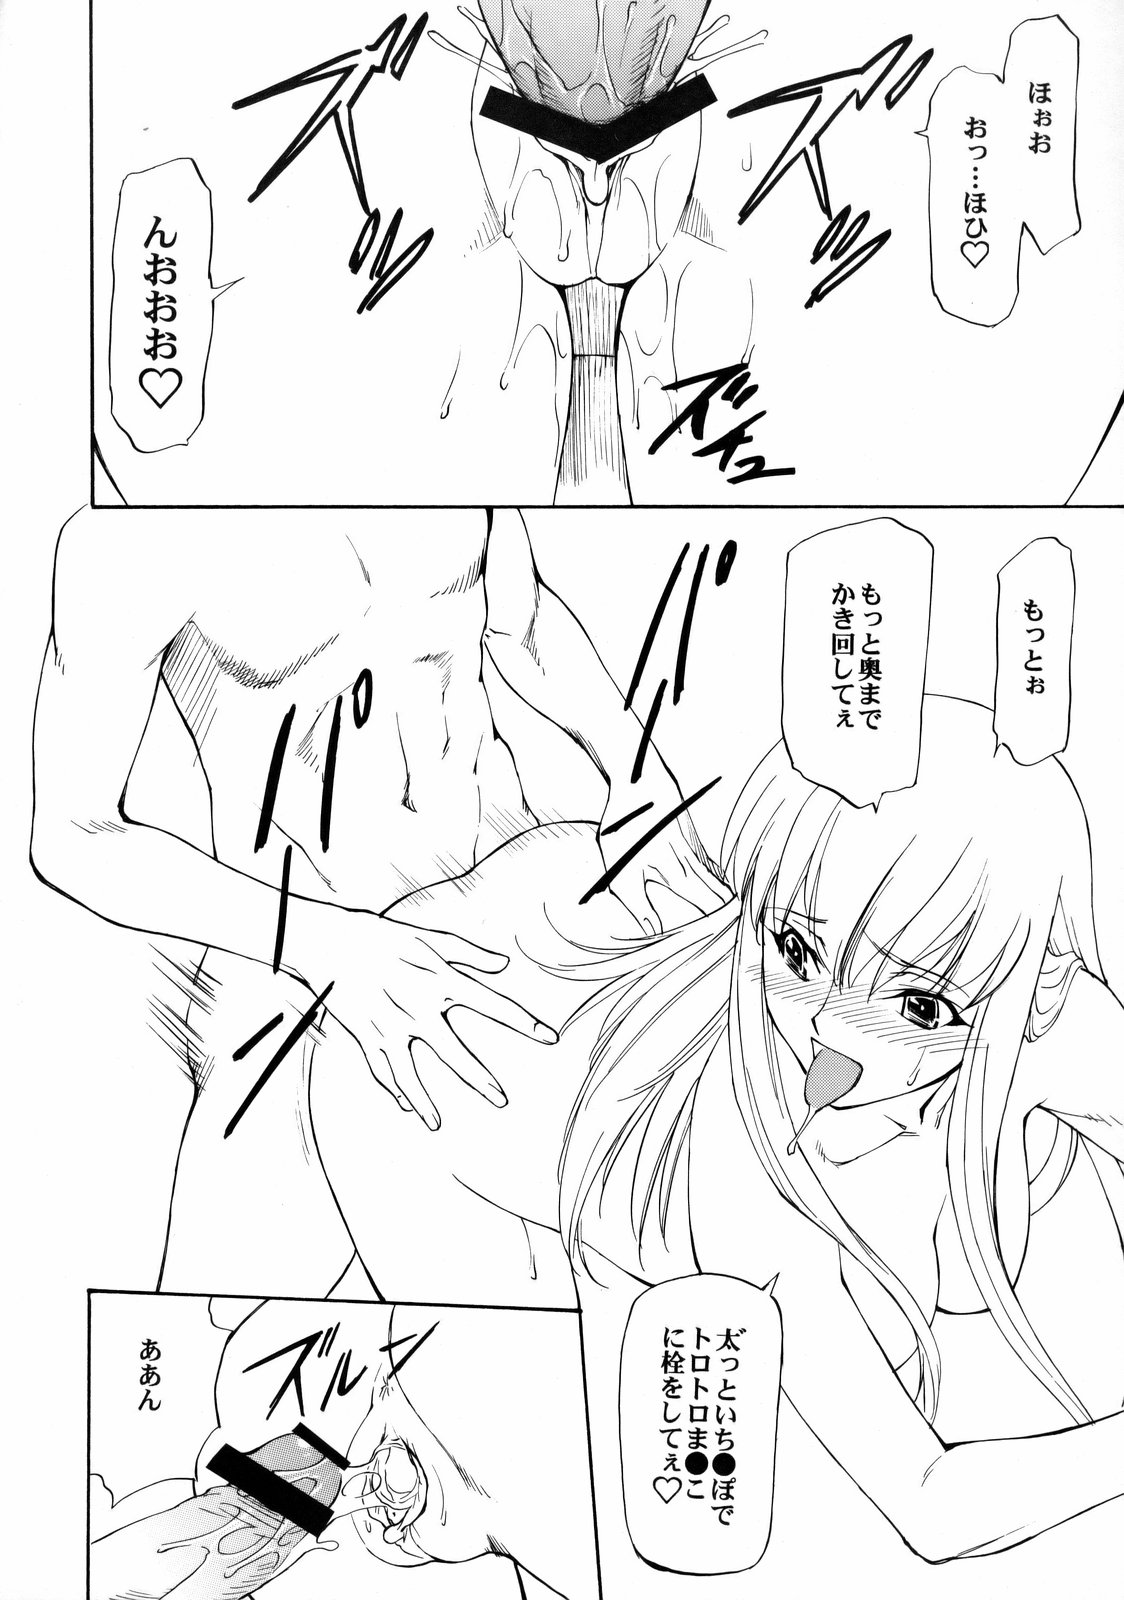 (C75) [Leaf Party (Nagare Ippon)] LeLe Pappa Vol. 14 Megumiruku (CODE GEASS: Lelouch of the Rebellion) page 11 full